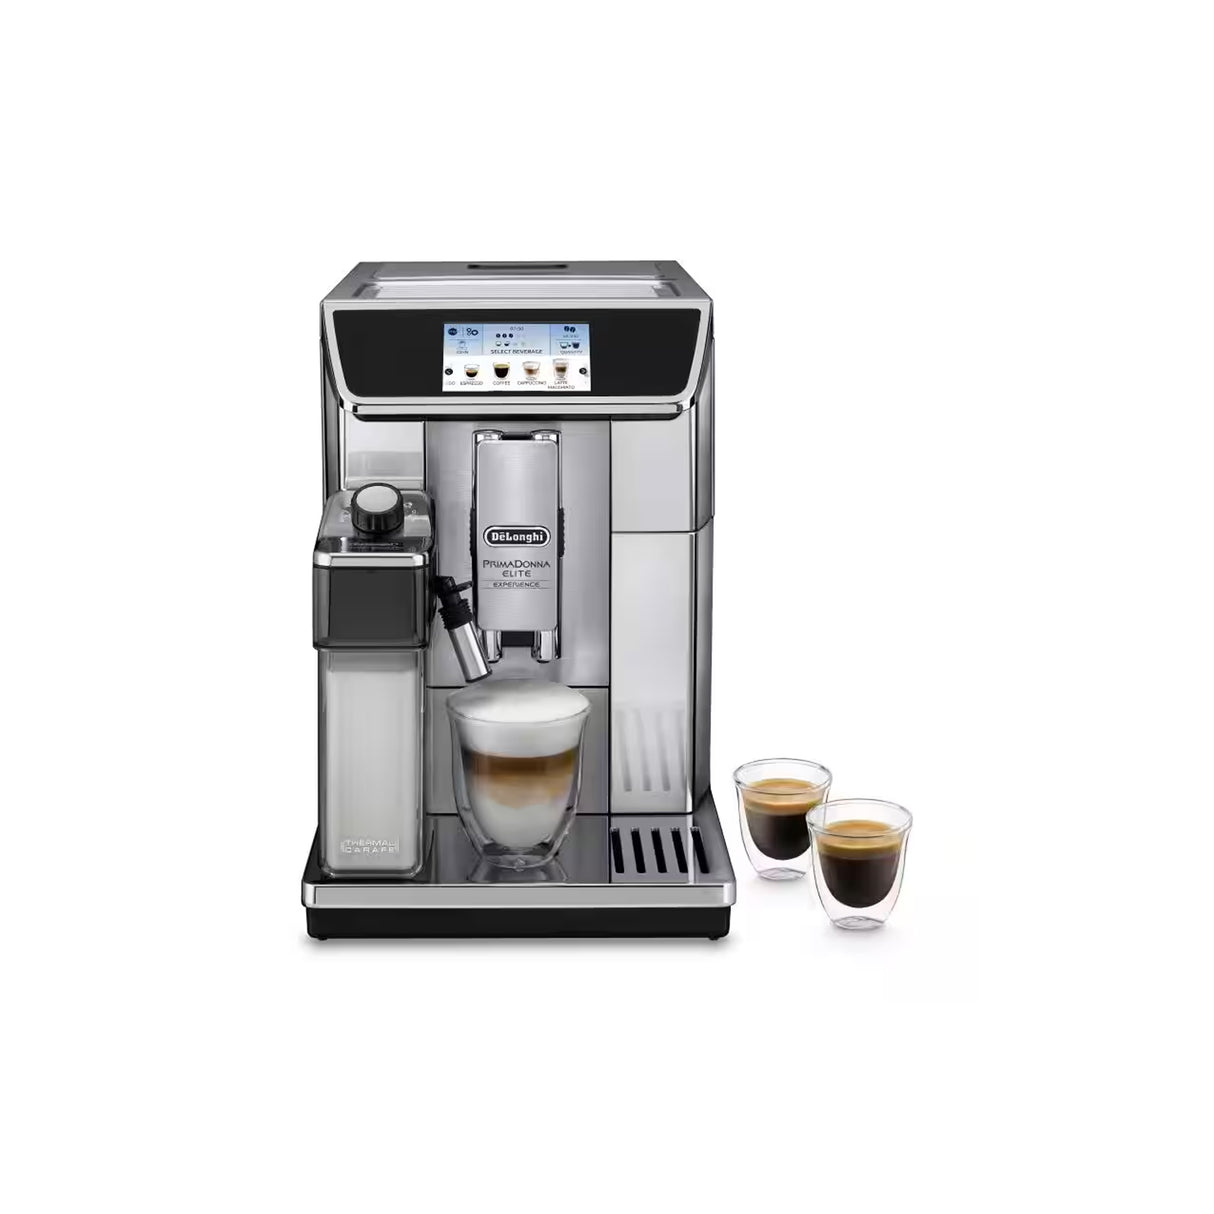 DeLonghi ECAM 650.85 - Full Automatic Coffee Maker with Automatic LatteCrema System, Auto Clean Milk Carafe, LCD Interface, Thermoblock Technology (Metallic/Black)